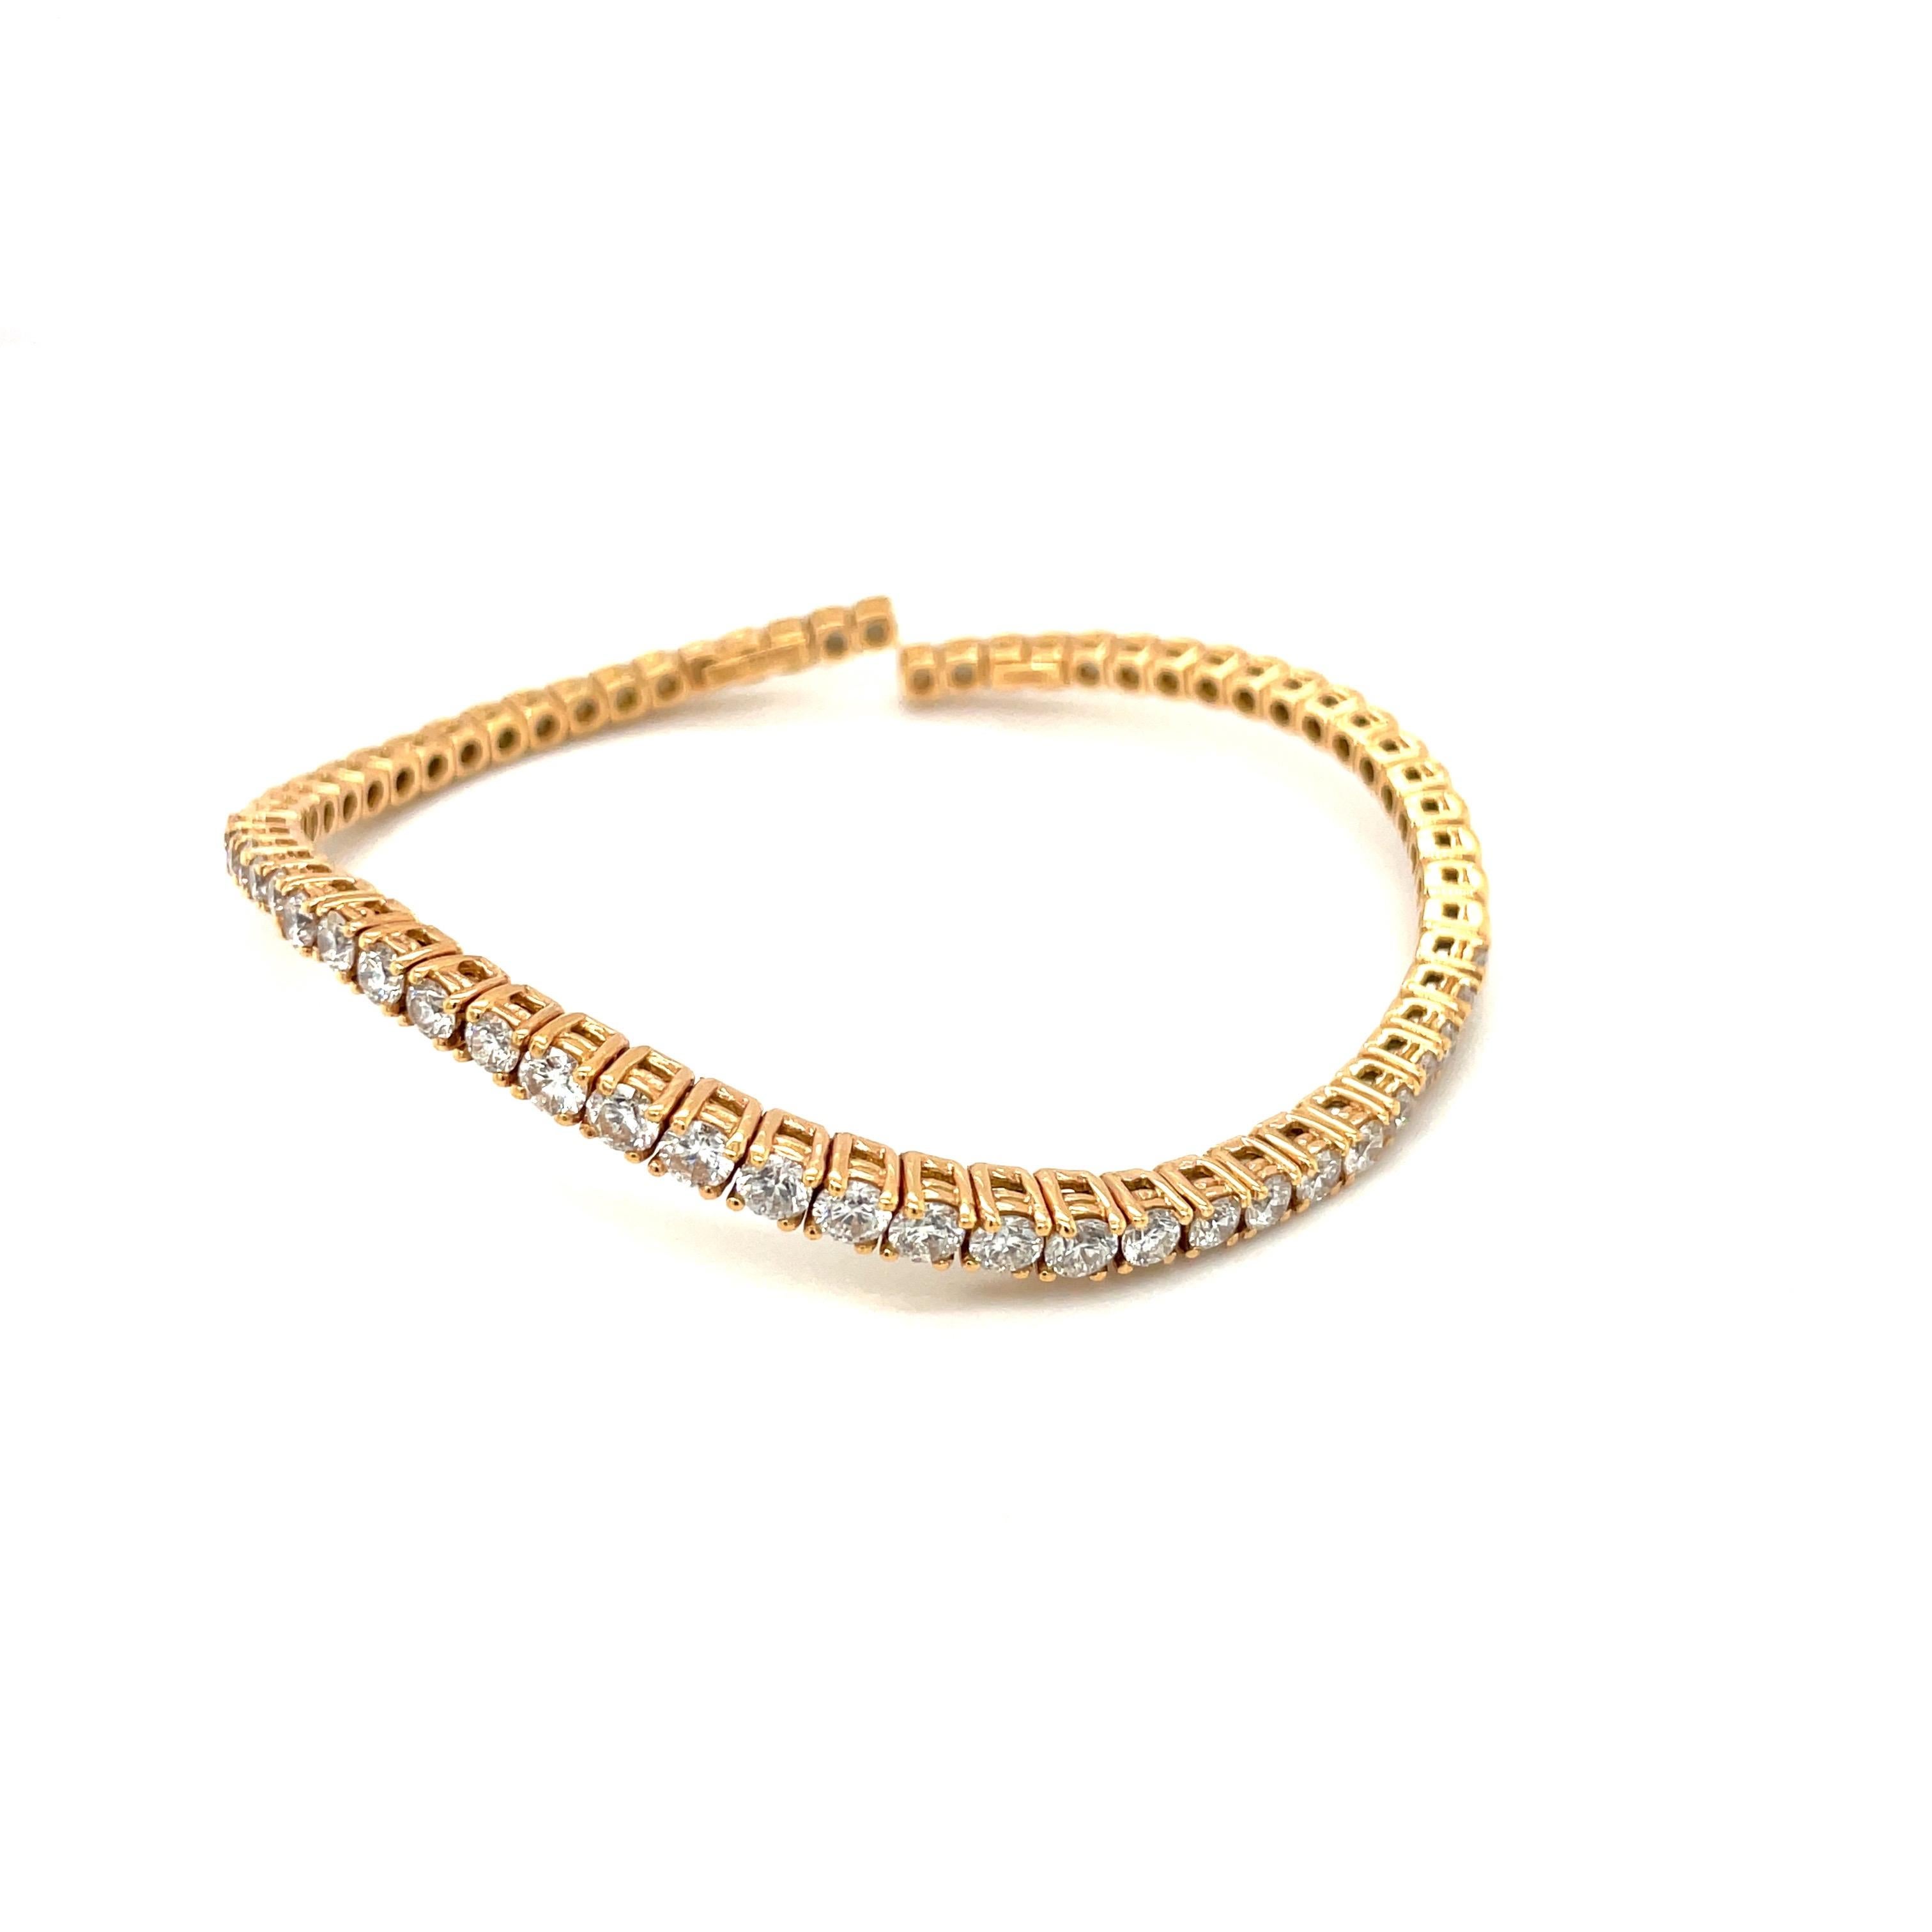 Made exclusively for Cellini by G. Verdi of Italy. This 18 karat rose gold curved bracelet is set with 28 round brilliant diamonds totaling 2.38 carats. The diamonds are set more than half way around so they are visible across  and on the sides of